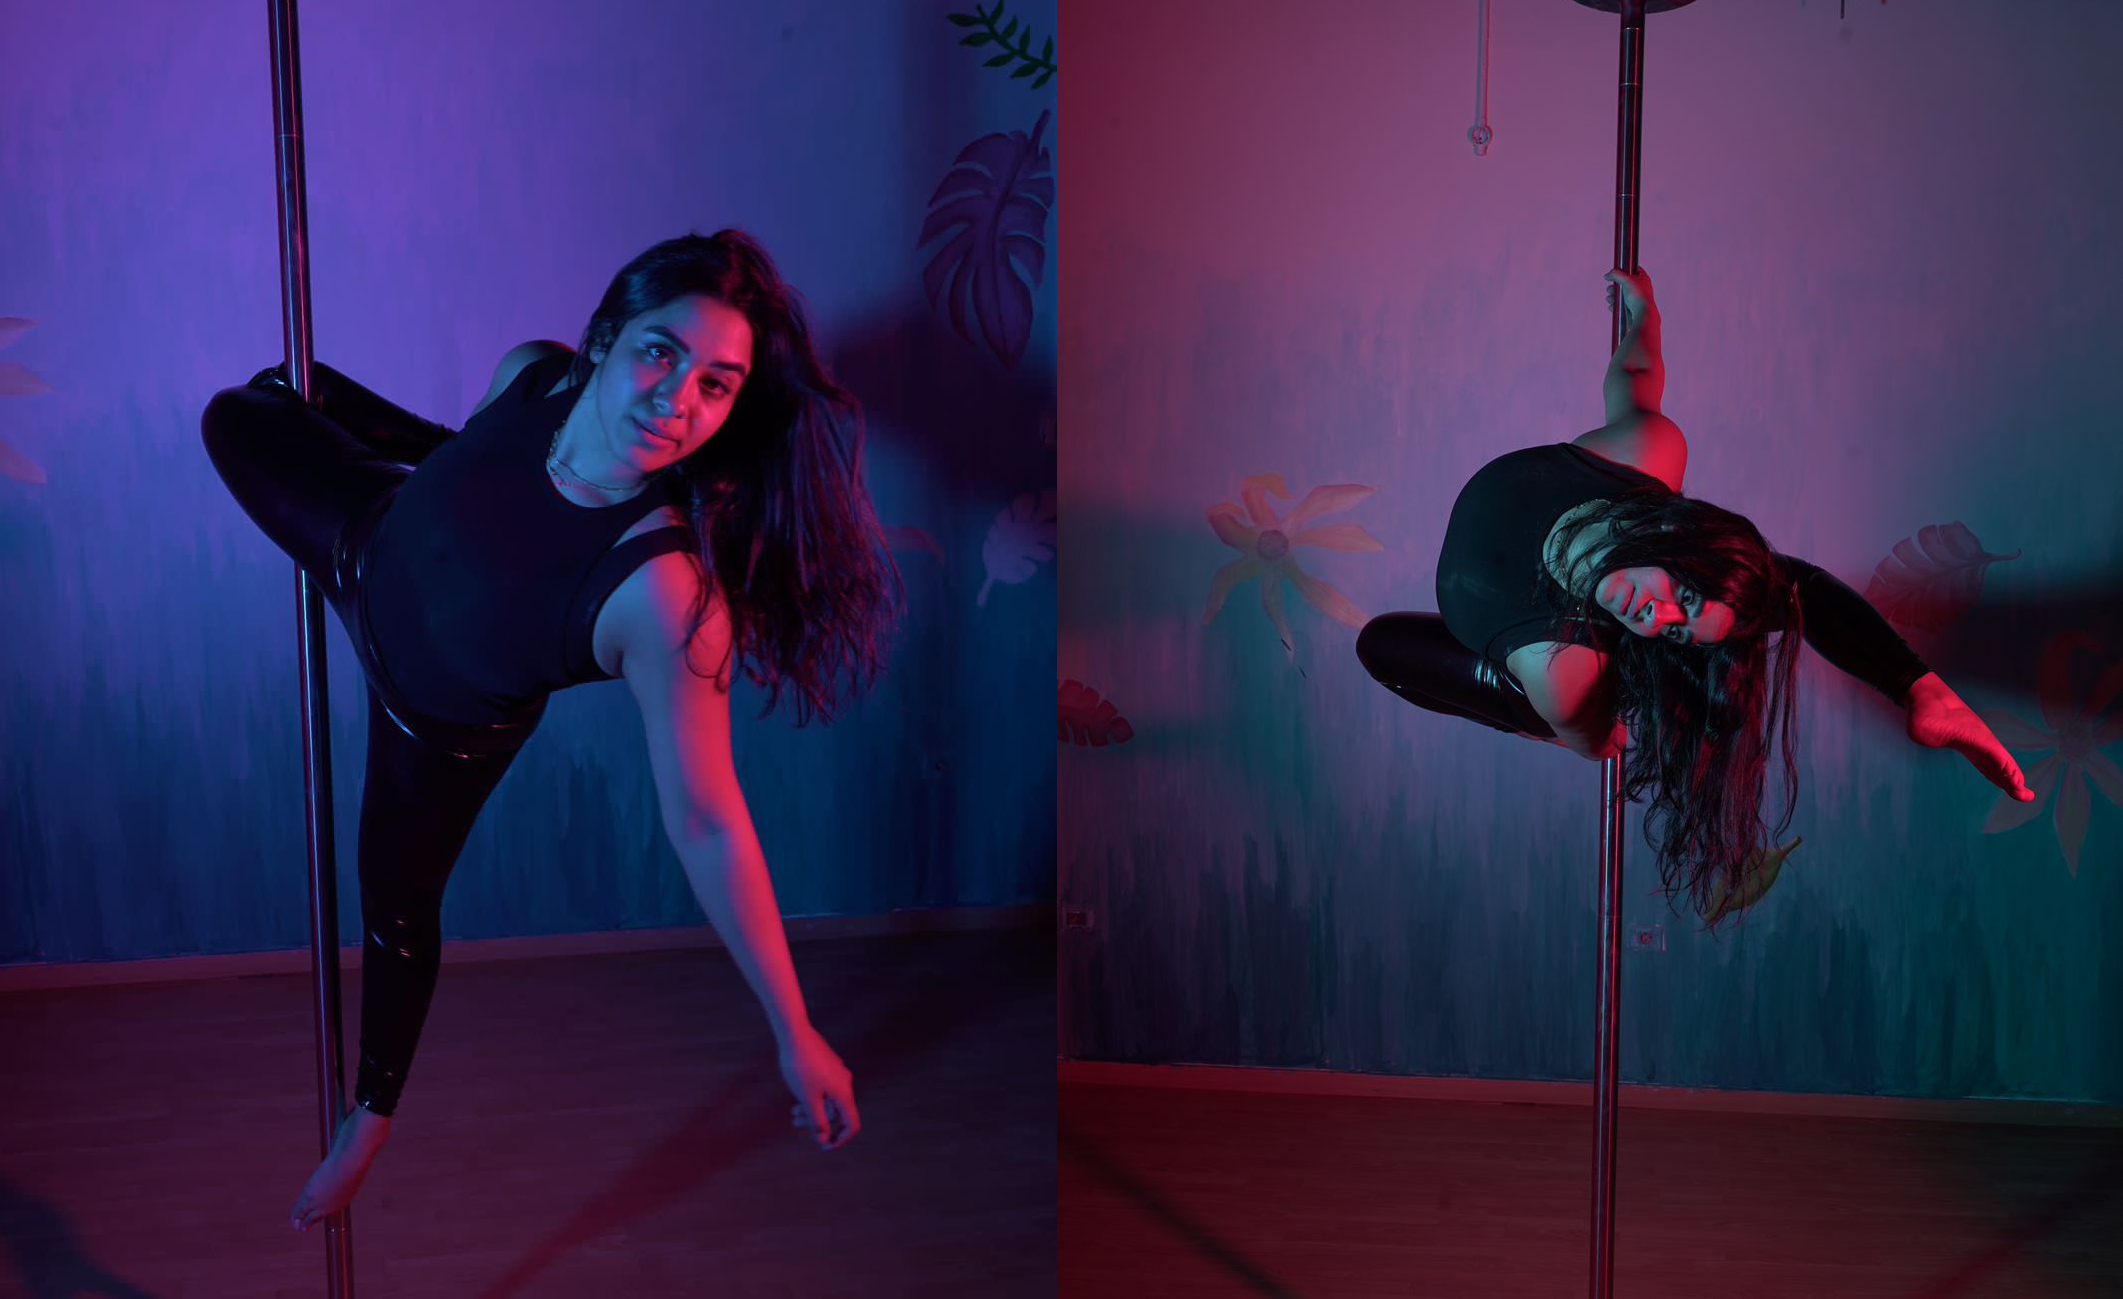 Two collaged images of Sharoubim, a woman with long dark hair wearing a black unitard. In each photo her body is draped around a pole and bathed in blue and red sidelights.